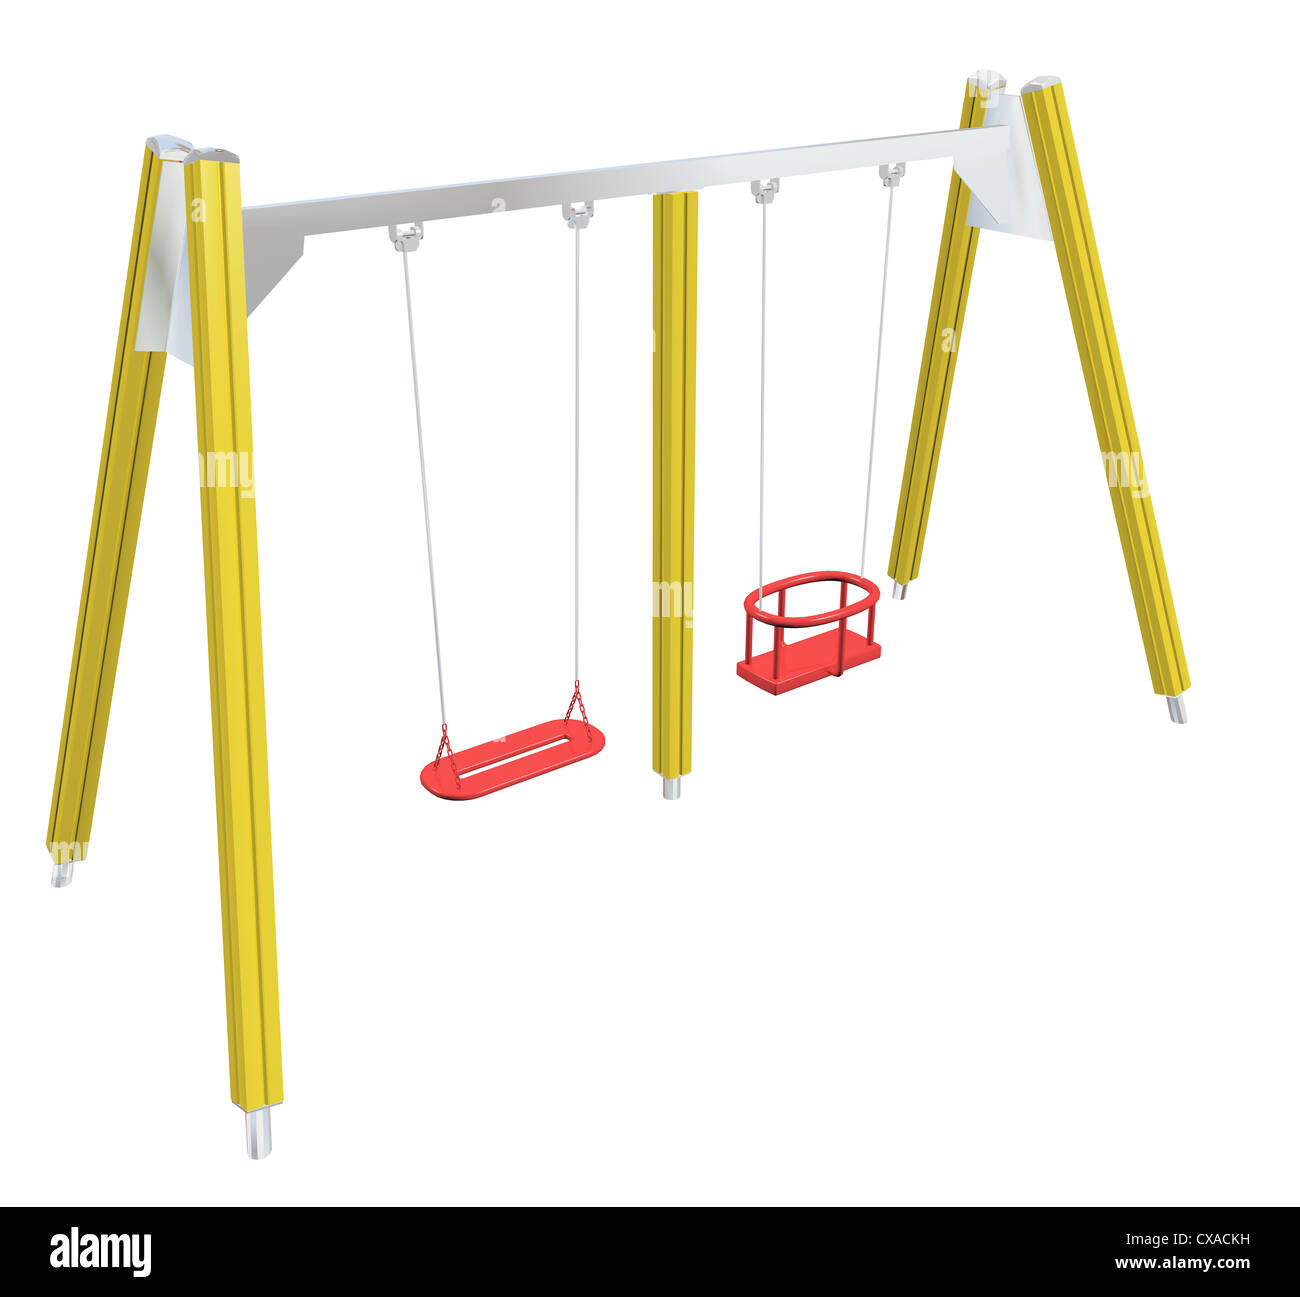 Child-safe swing, yellow and red, 3D illustration, isolated against a white background. Stock Photo